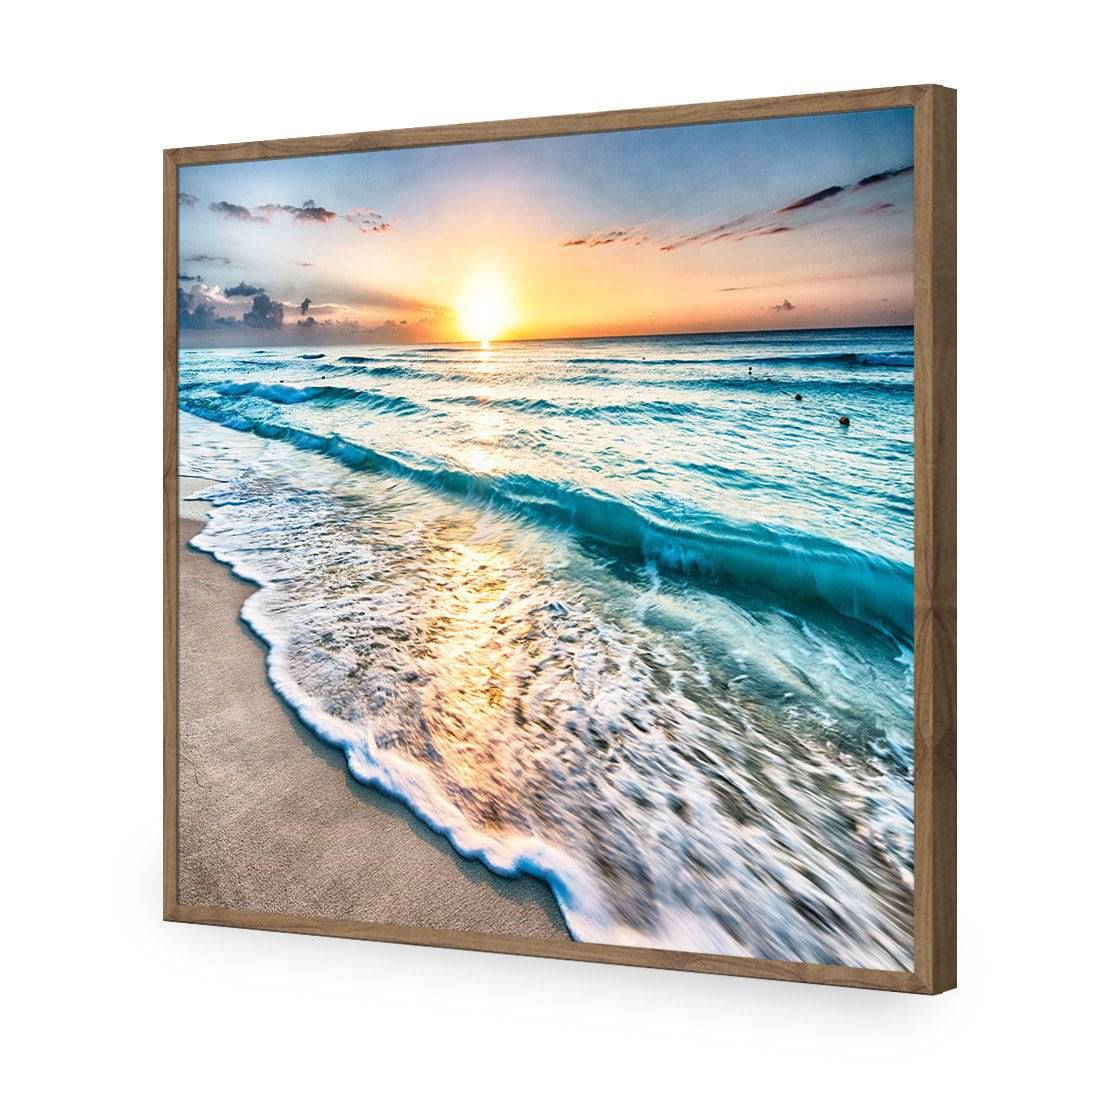 Glimmering Sunrise, Square-Acrylic-Wall Art Design-Without Border-Acrylic - Natural Frame-37x37cm-Wall Art Designs